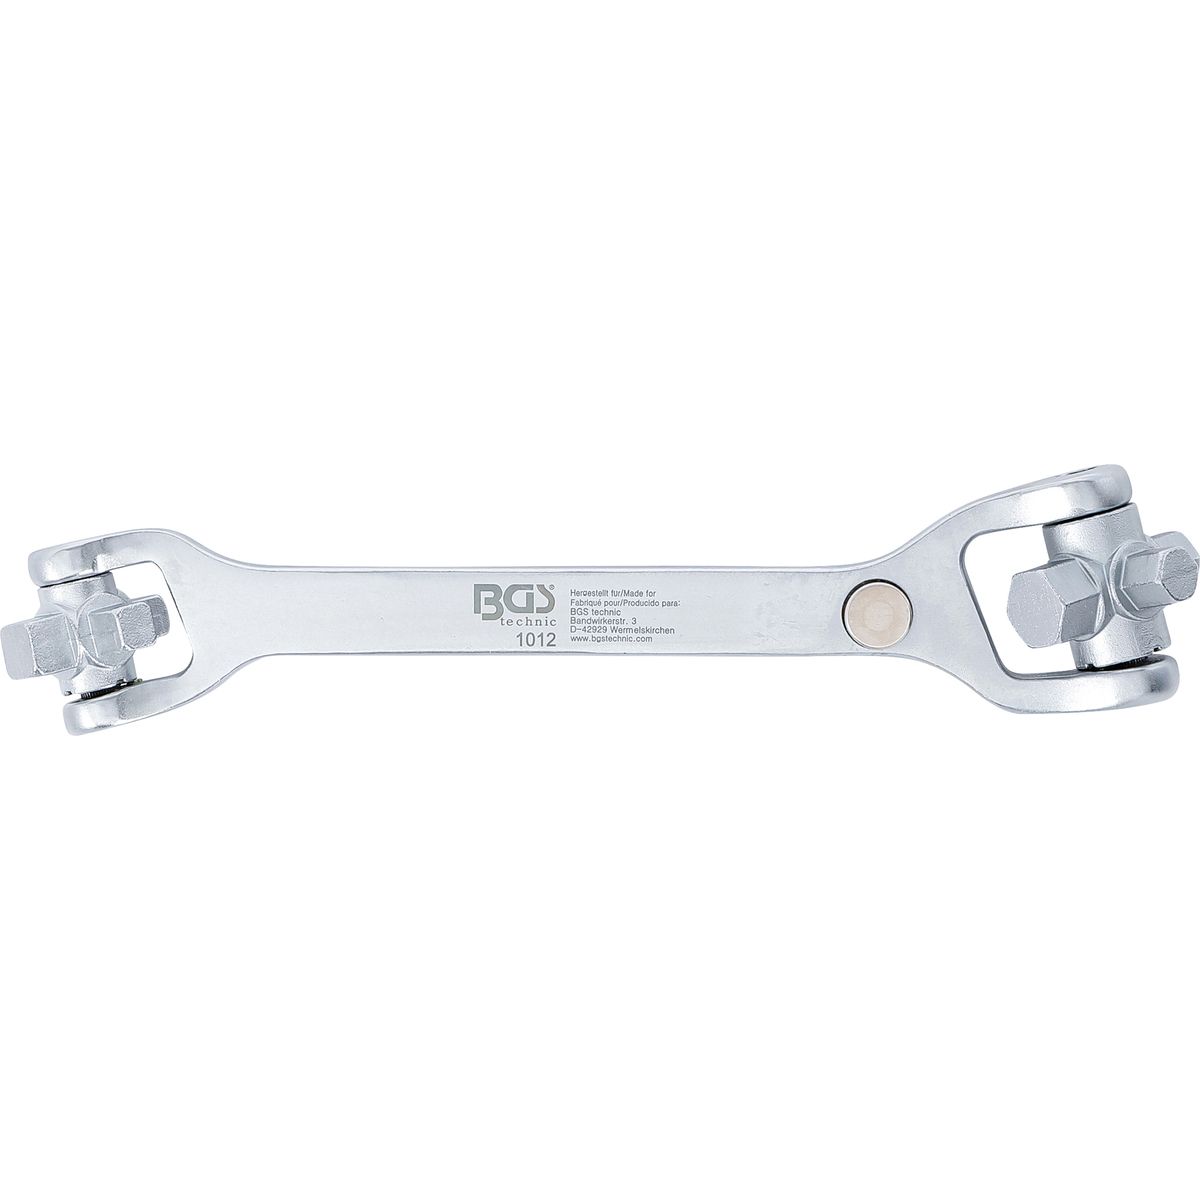 Special Oil Drain Plug Wrench "8-IN-1"